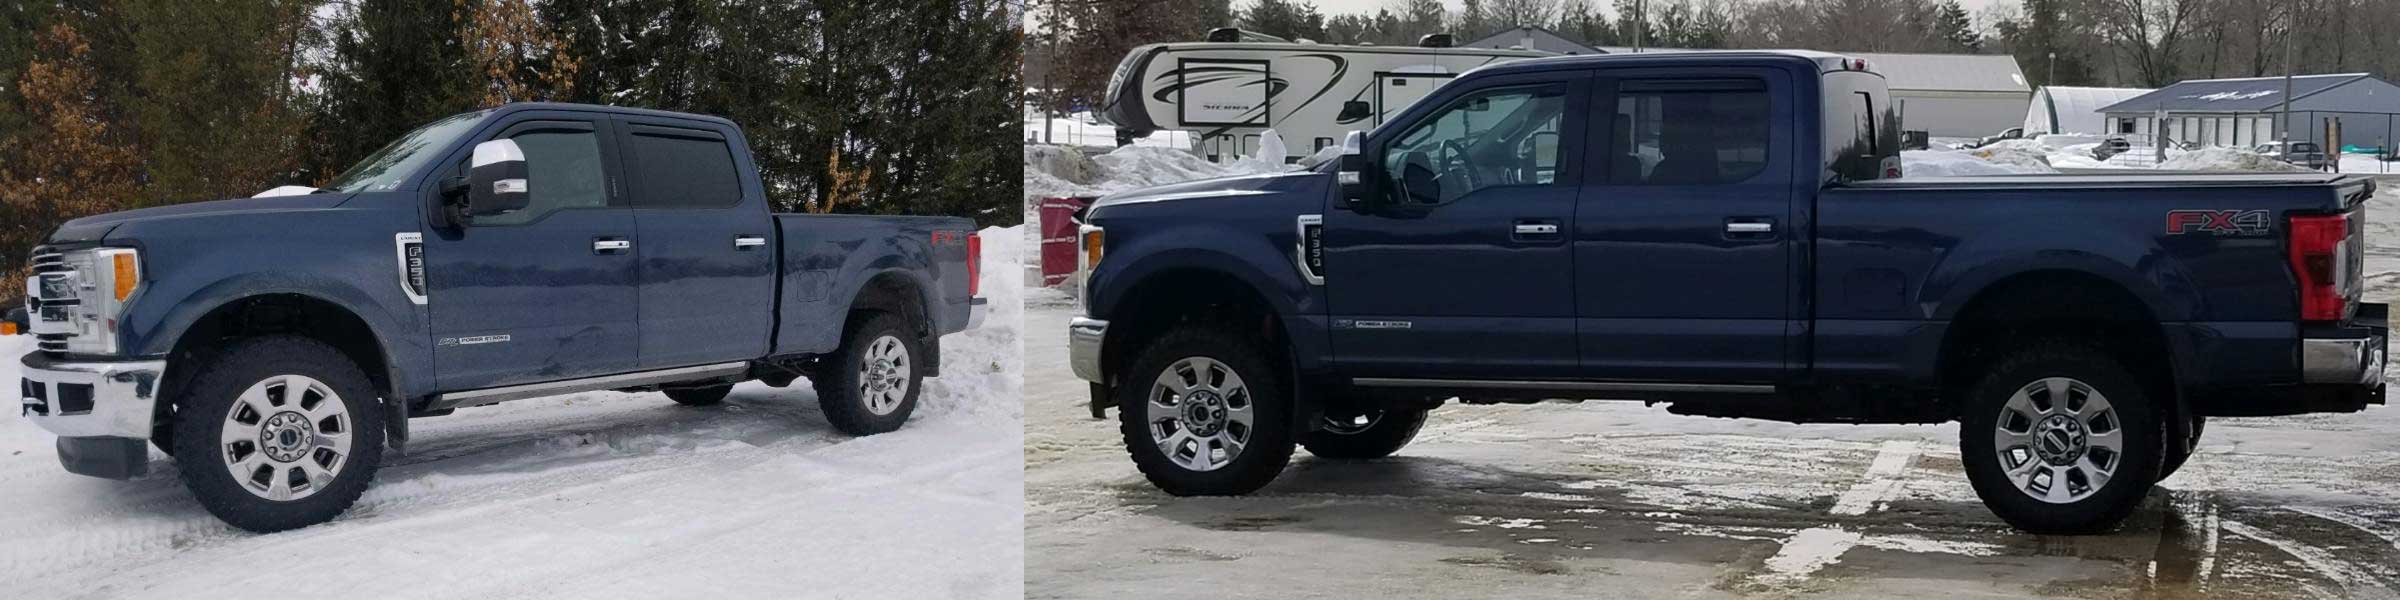 TMC before and after Suspension Lift kit installation